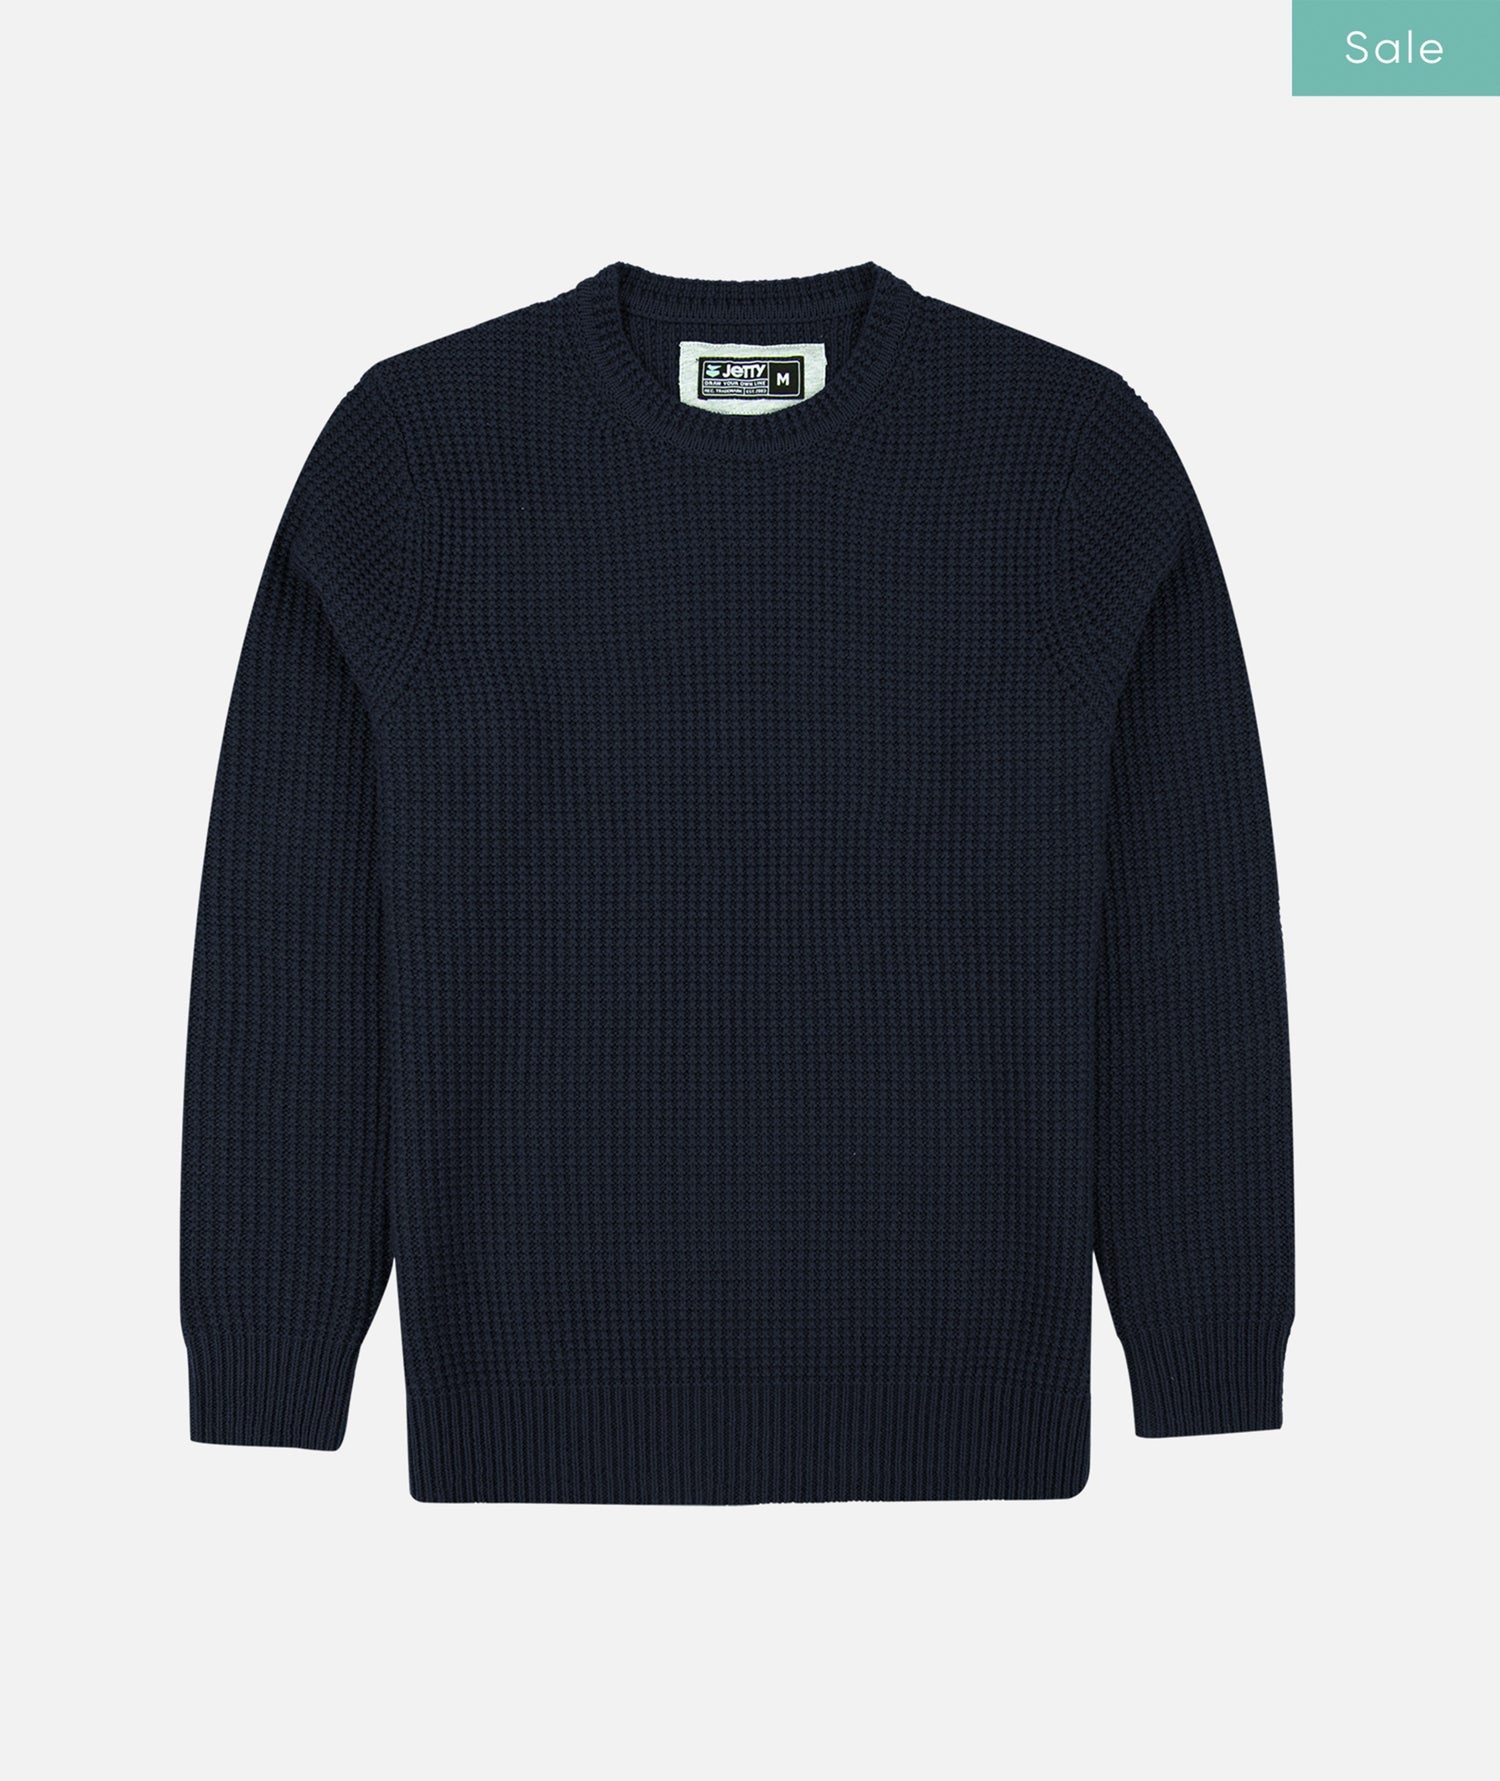 Group: Paragon Sweater